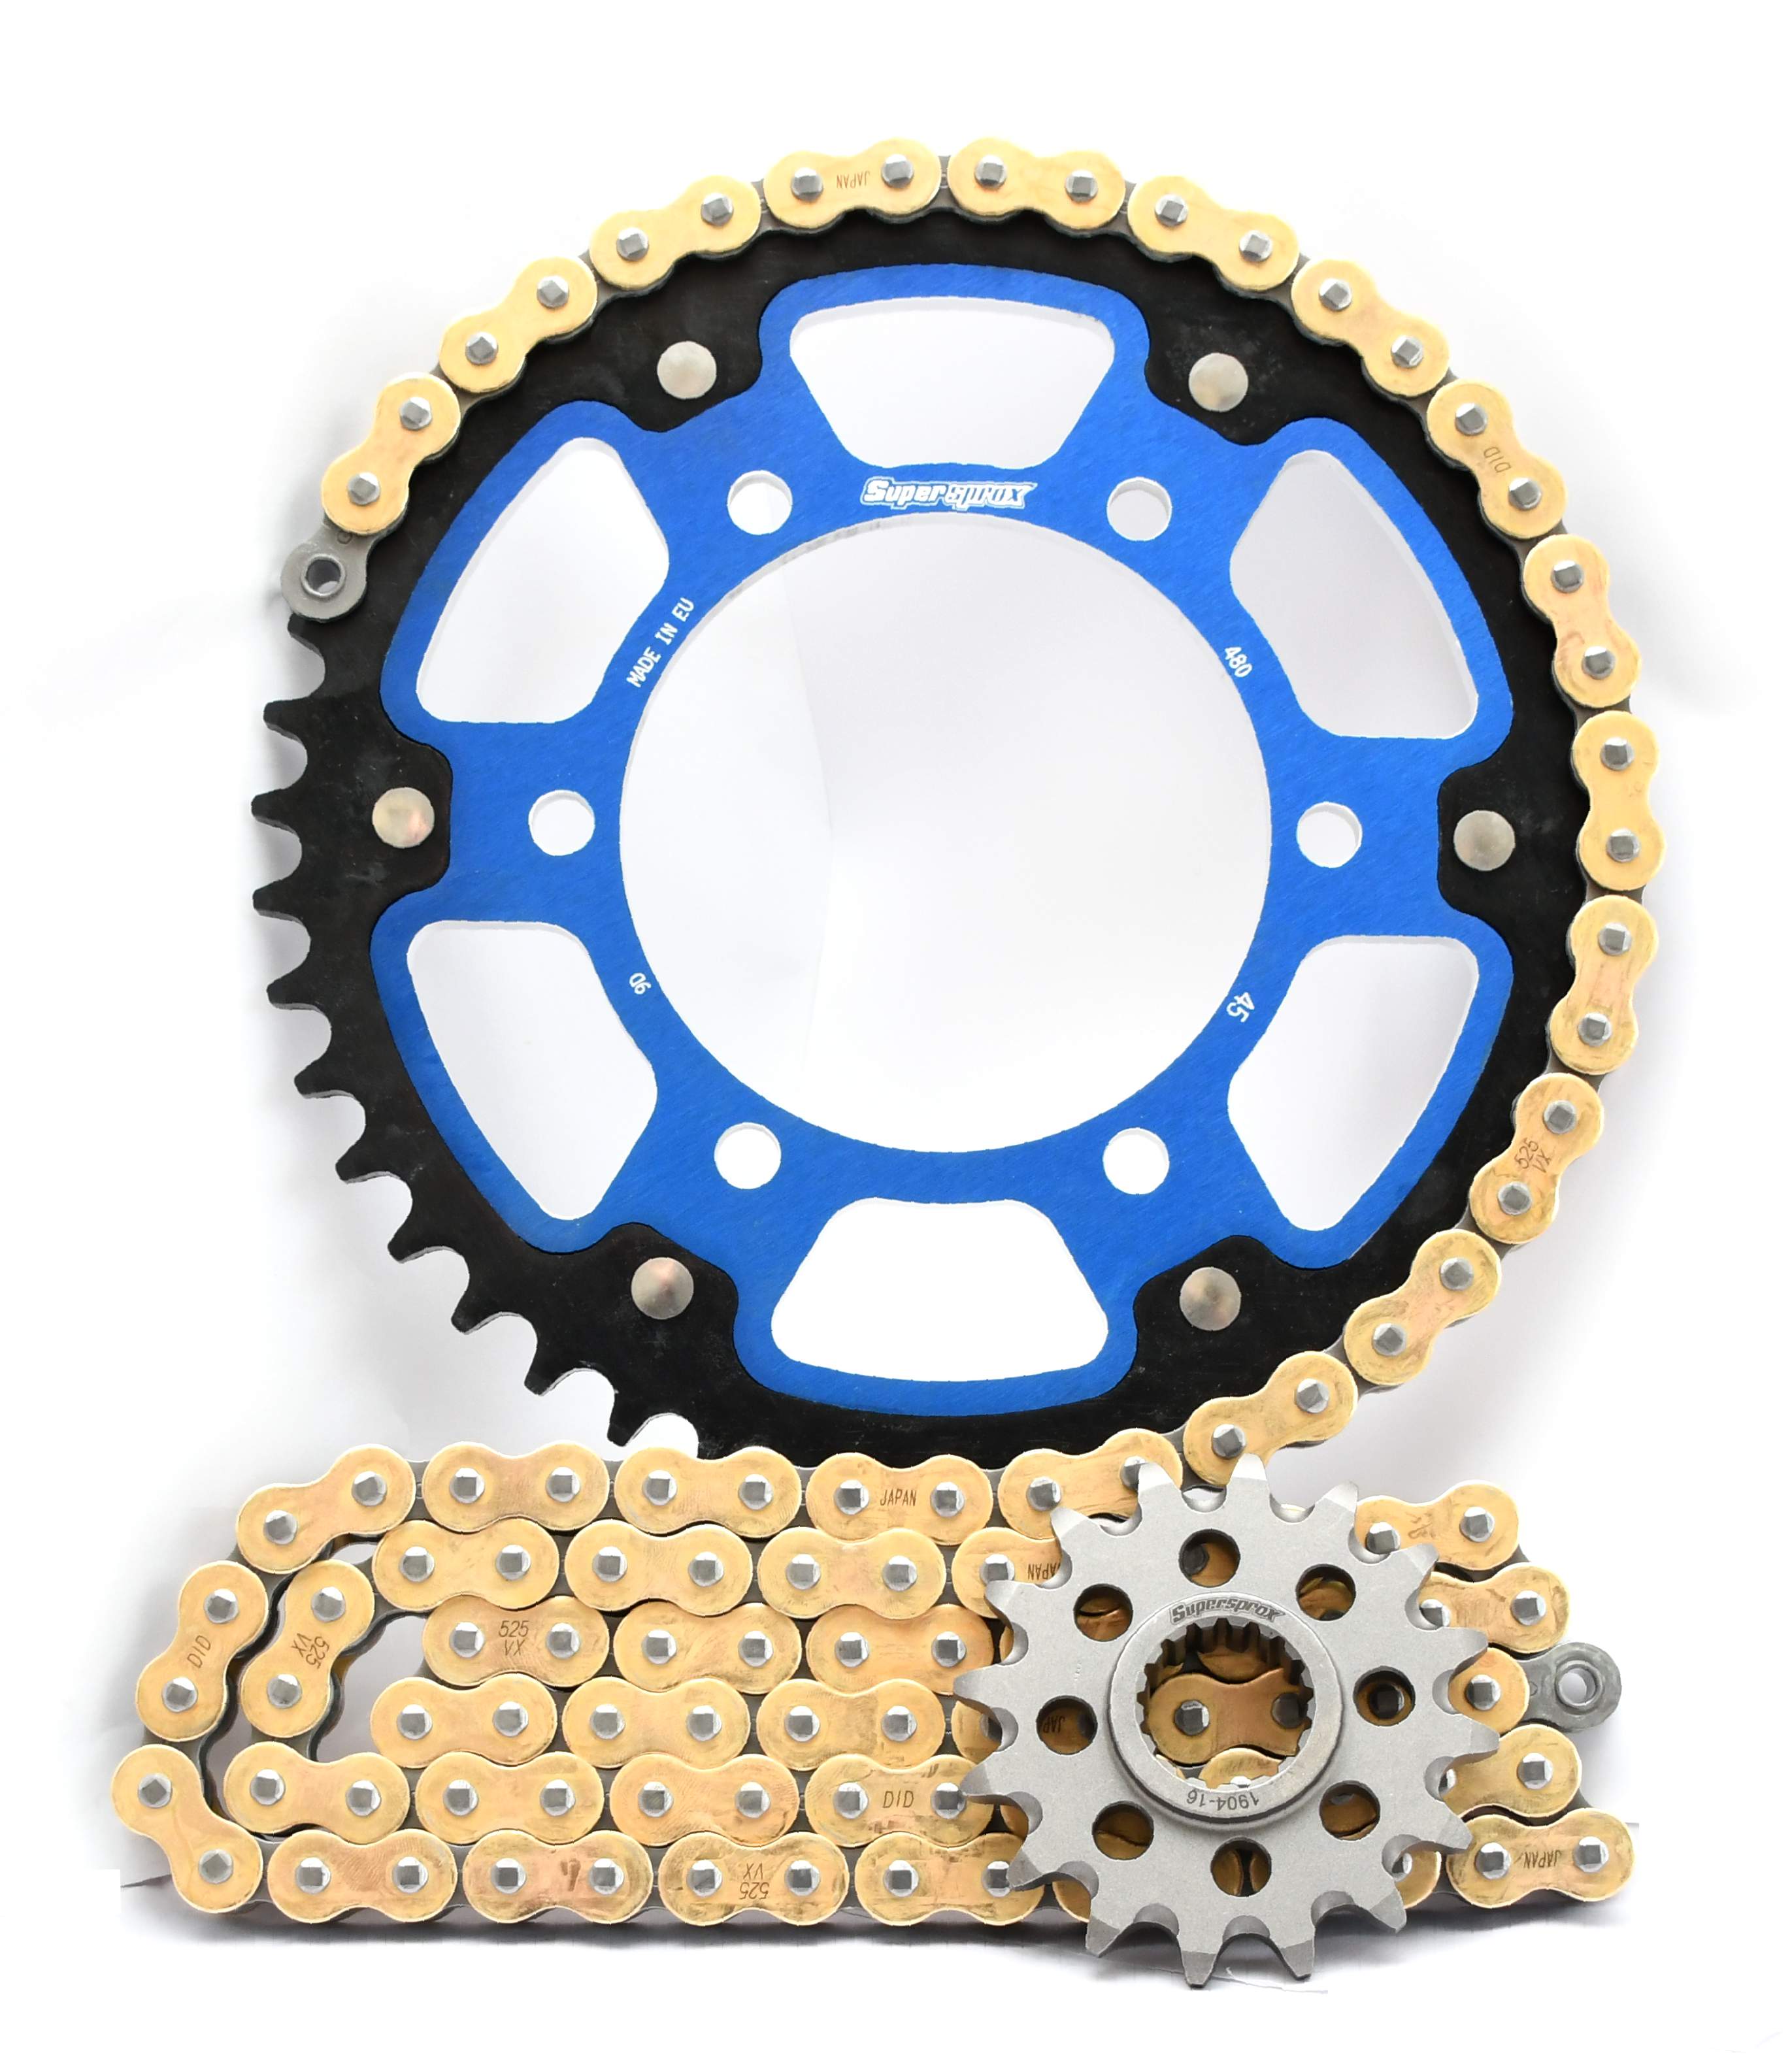 Supersprox Chain & Sprocket Kit for Yamaha MT-10 - Standard Gearing - 0